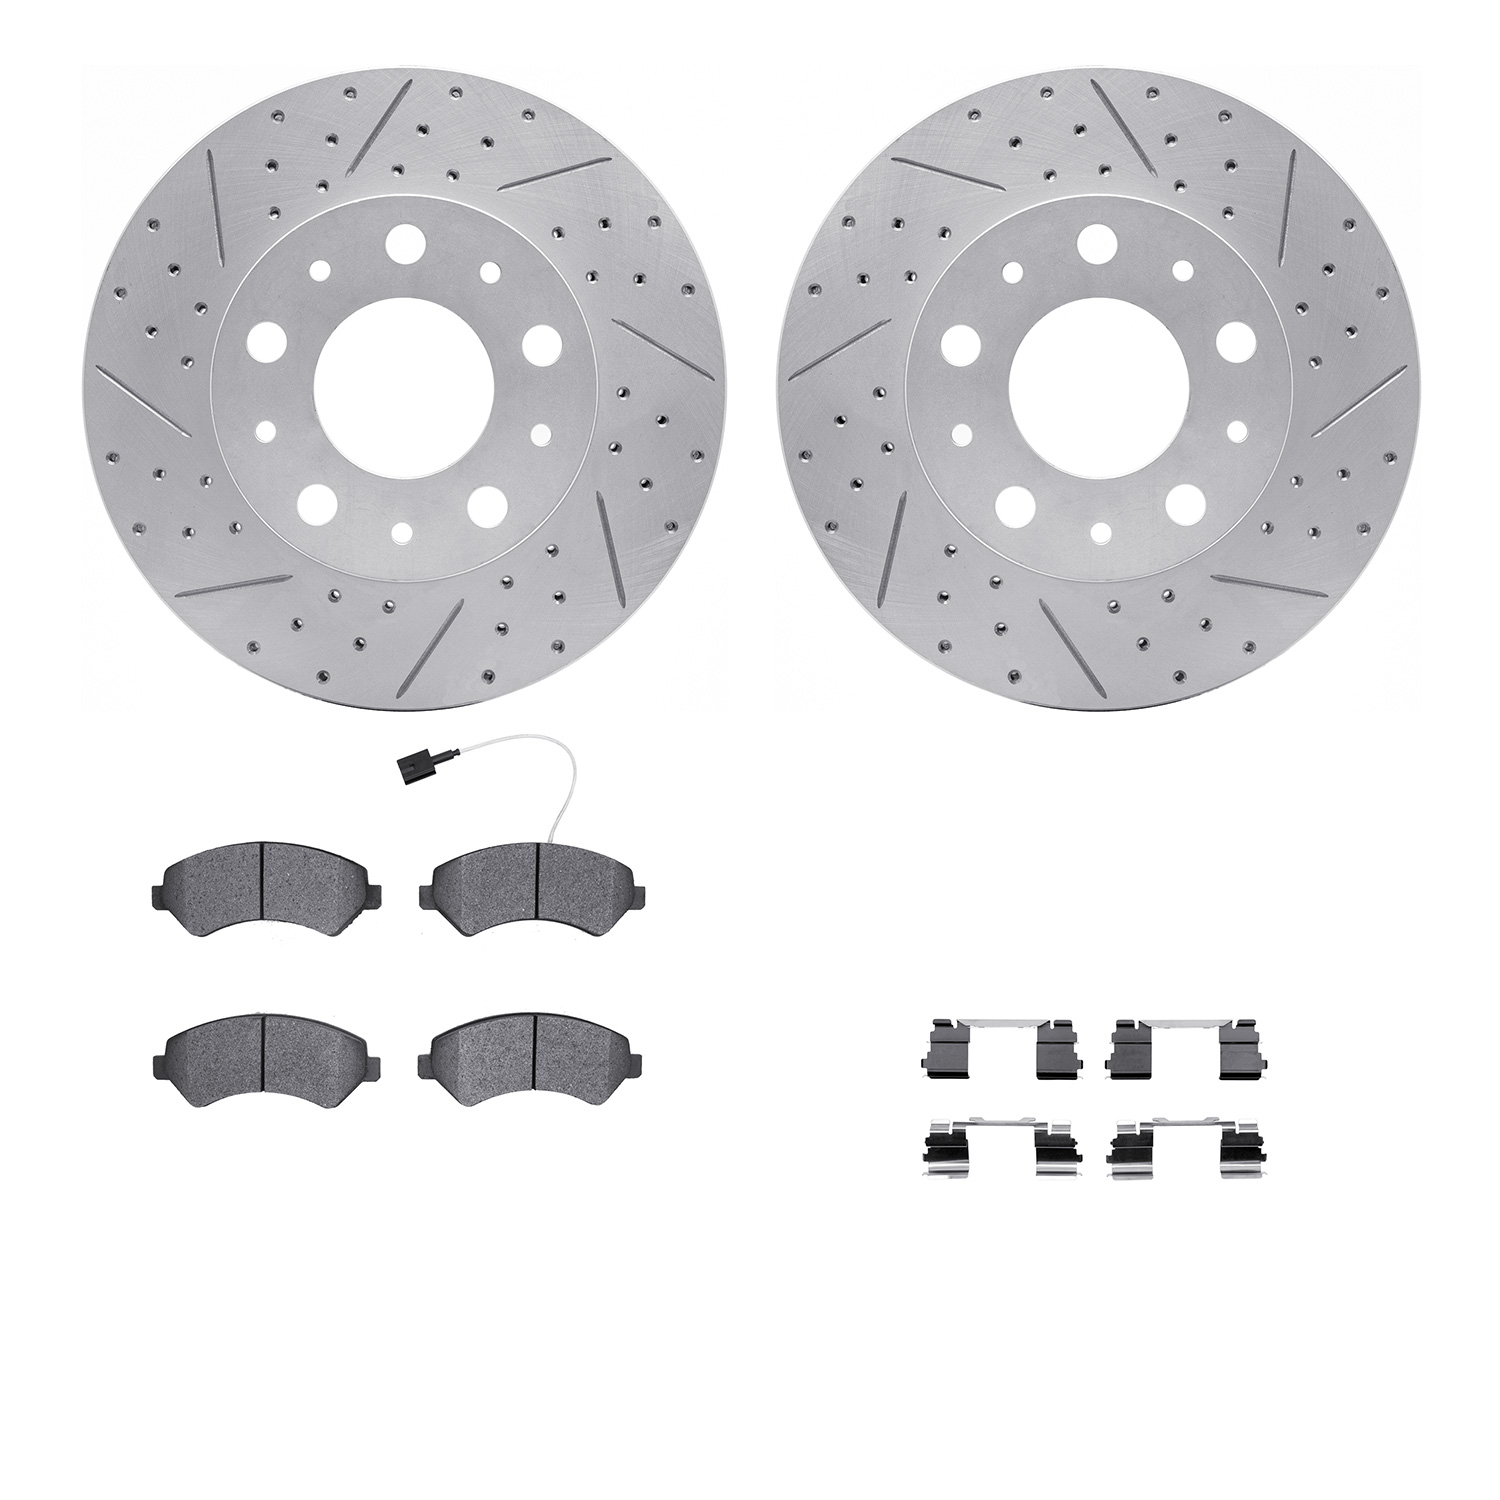 2212-40079 Geoperformance Drilled/Slotted Rotors w/Heavy-Duty Pads Kit & Hardware, Fits Select Mopar, Position: Front